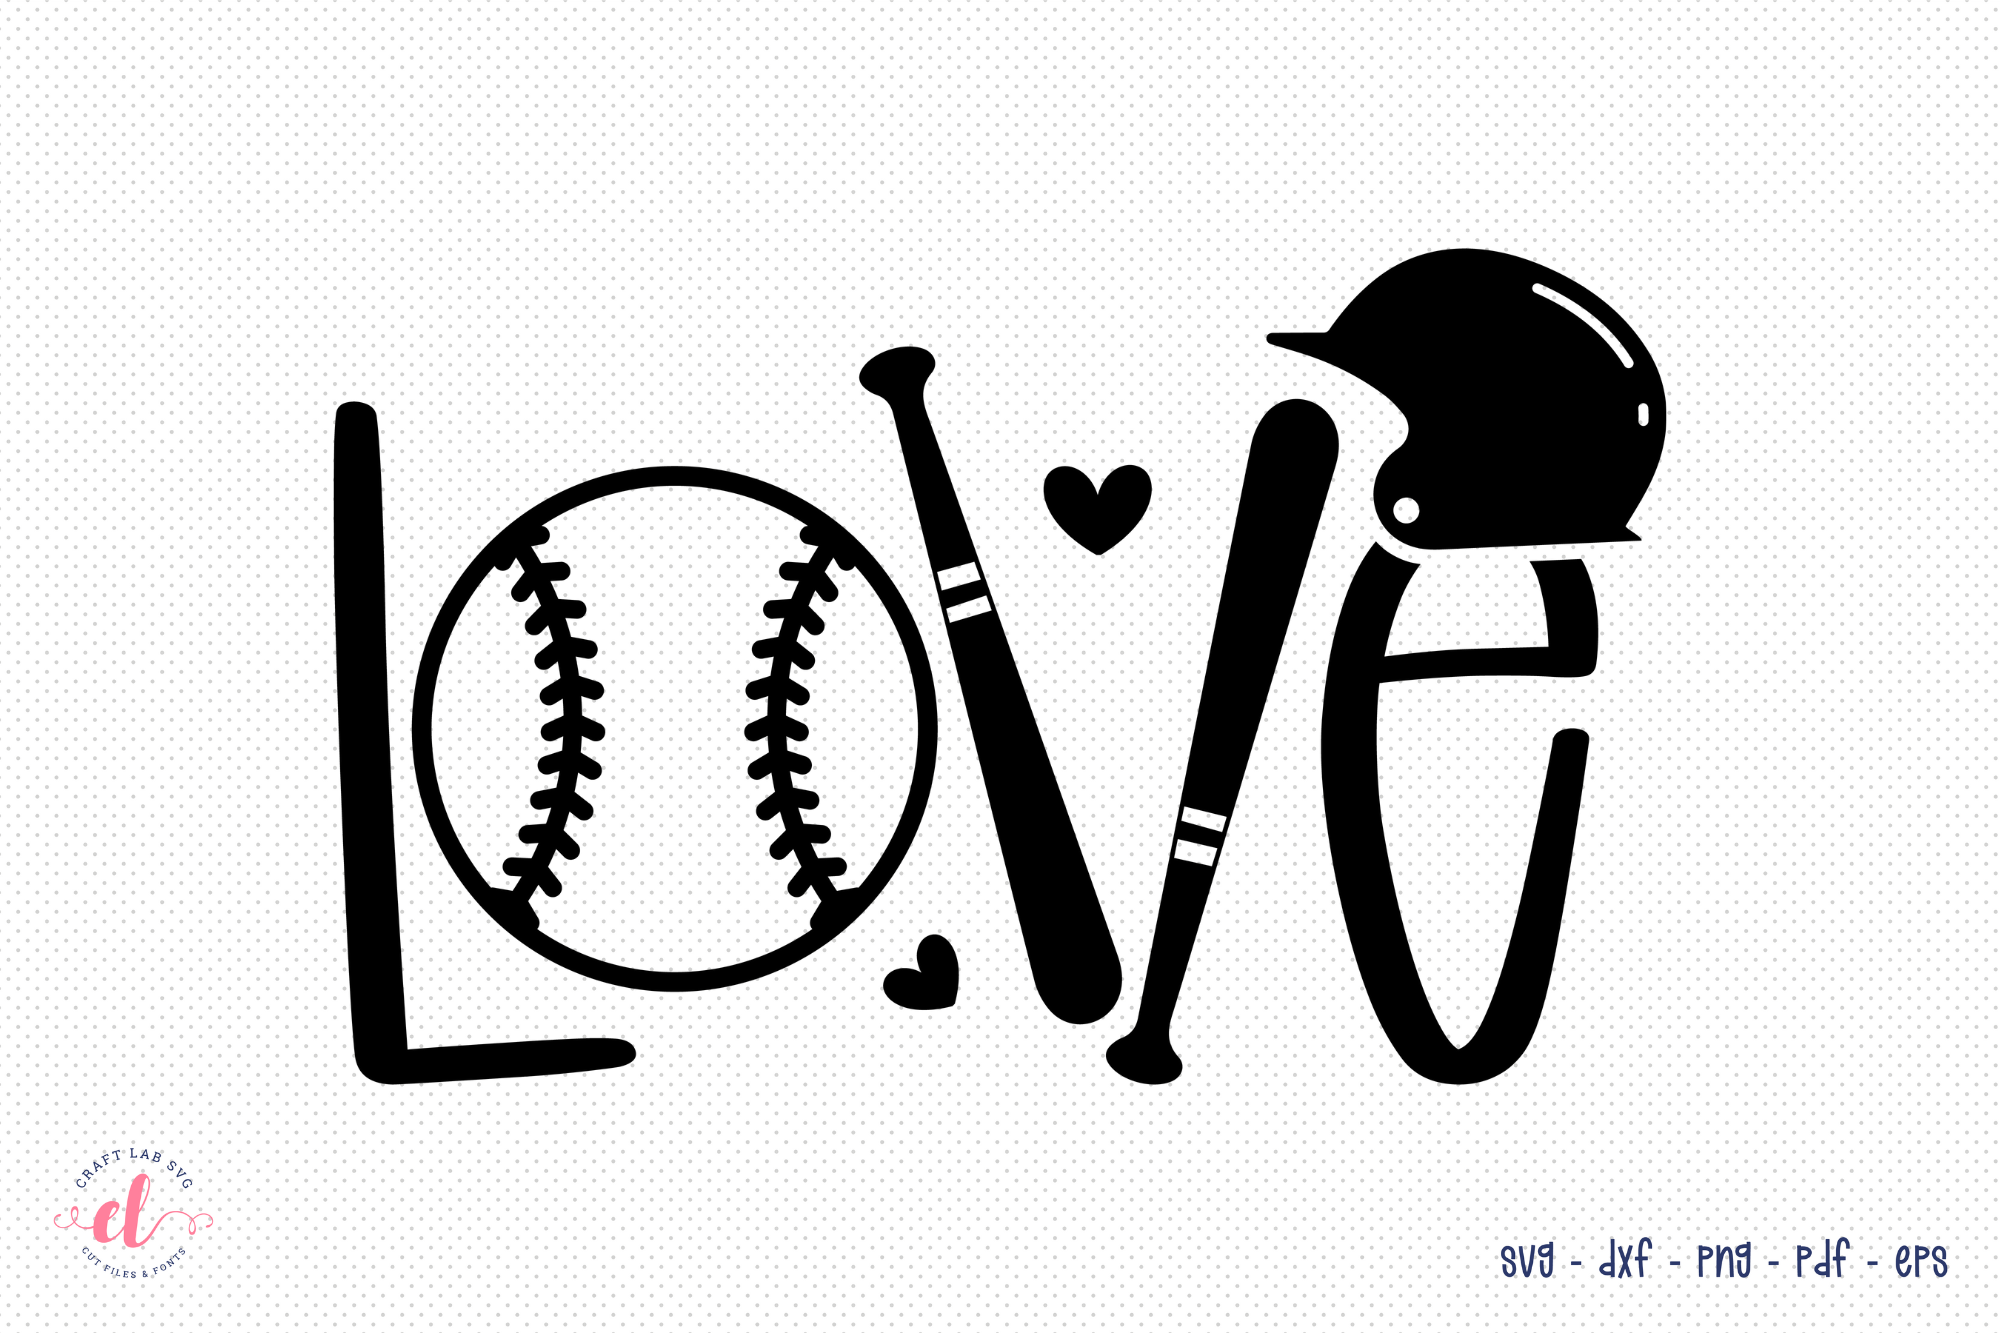 Baseball Stitch, ball, numbers, svg, png, dxf, pdf,eps for cricut,  silhouette studio,cutting machines, vinyl decal, stencil, t shirt design